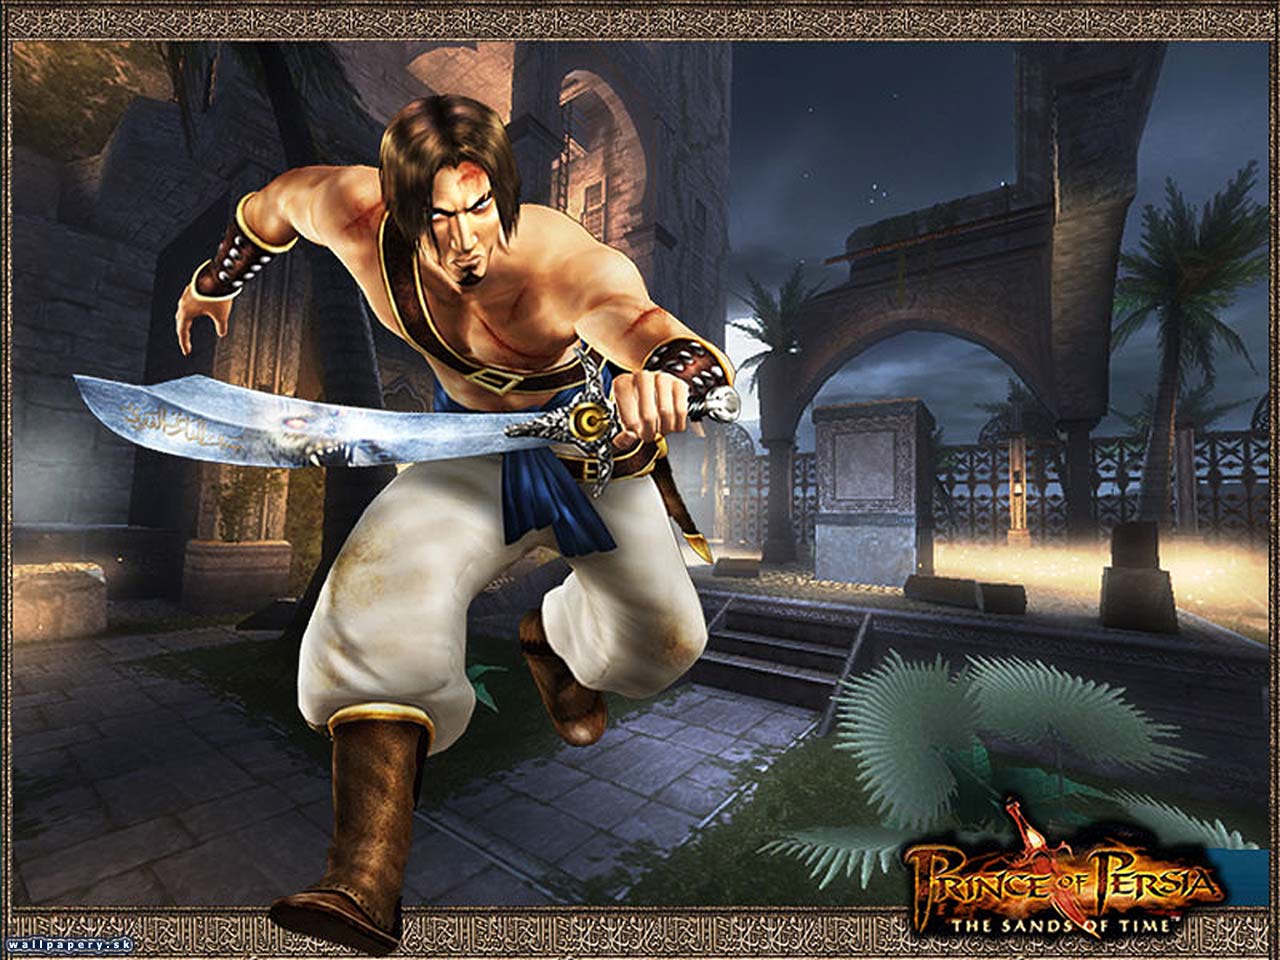 Prince of Persia: The Sands of Time - wallpaper 1